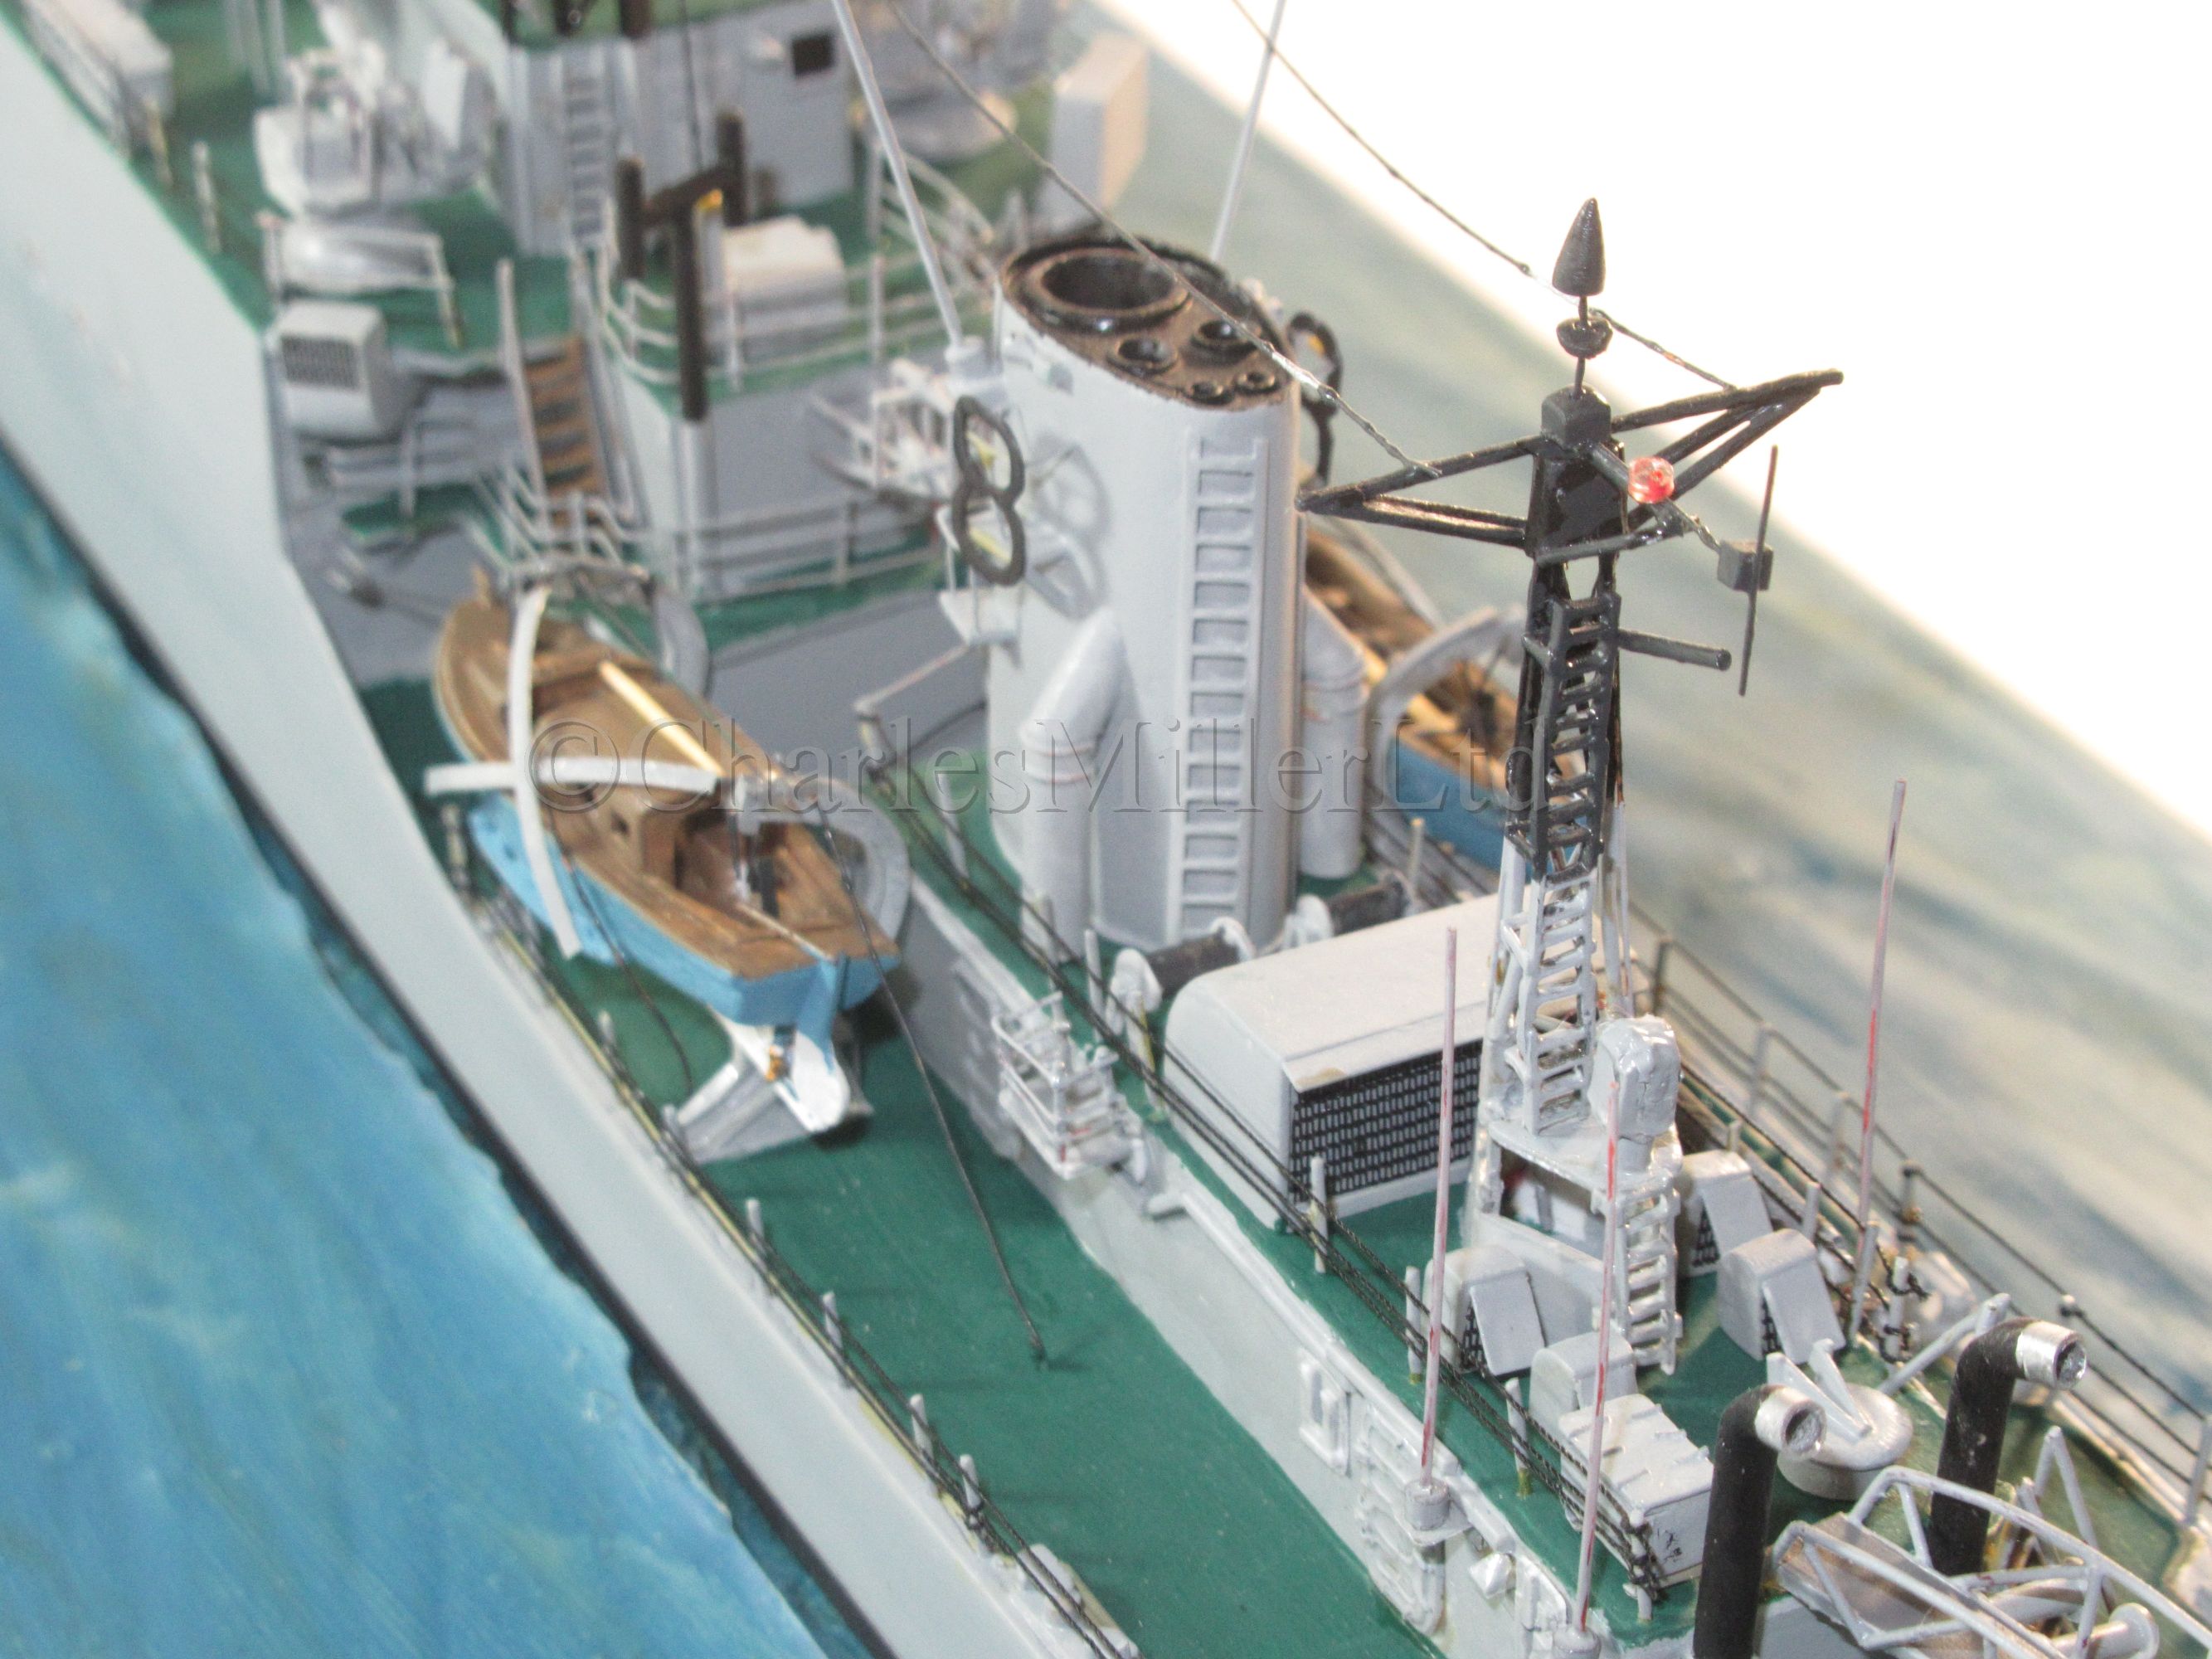 A 1:192 WATERLINE MODEL FOR THE TYPE 14 BLACKWOOD CLASS FRIGATE HMS GRAFTON (F51), AS FITTED IN - Image 13 of 14